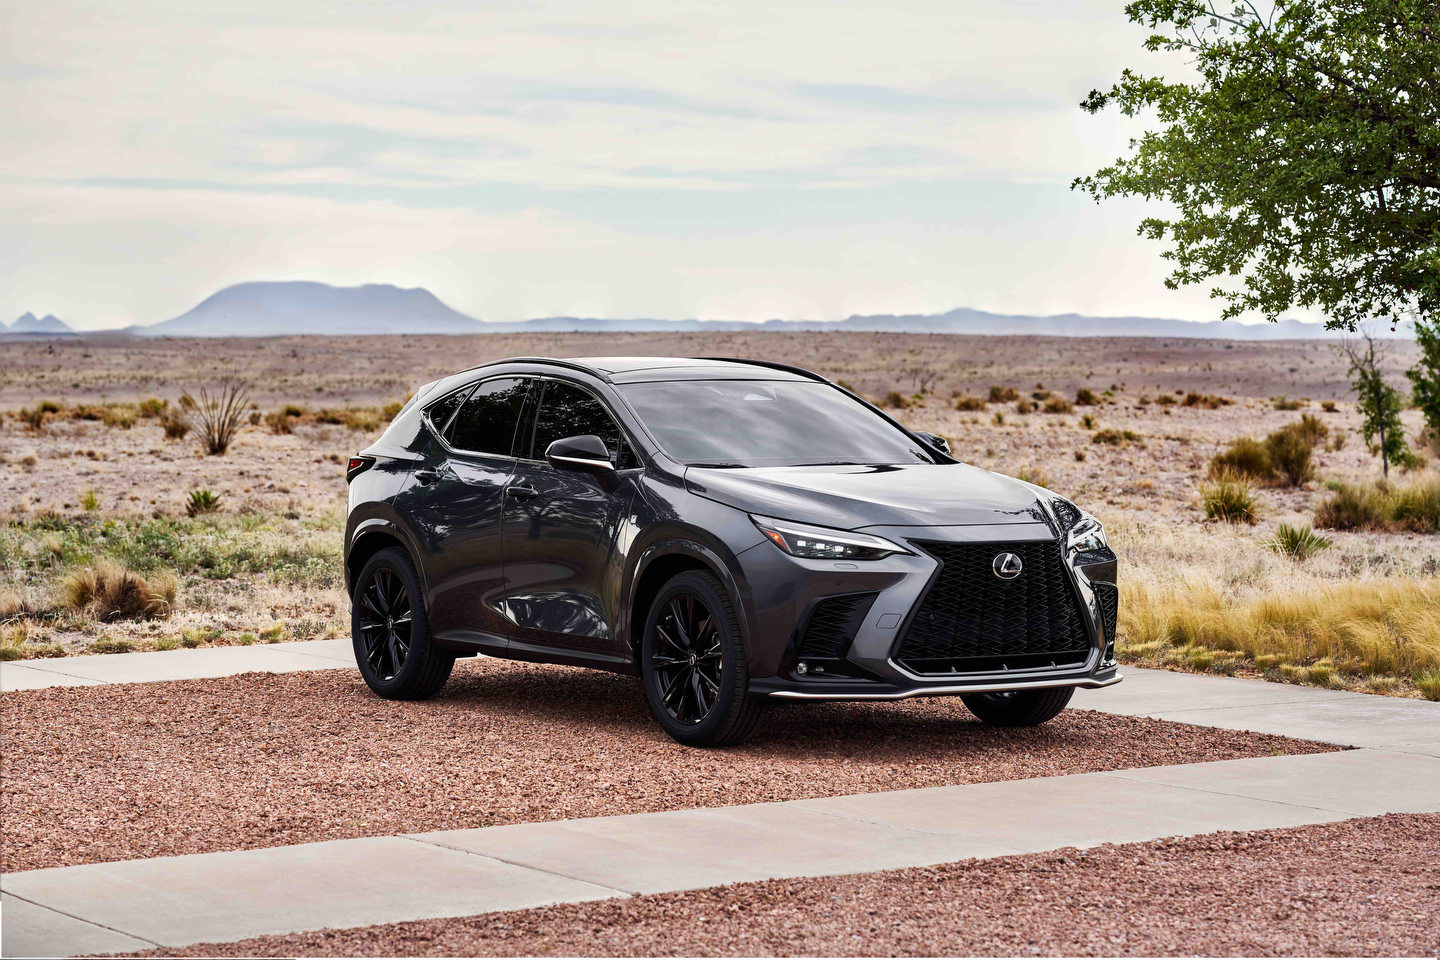 2022 Lexus NX vs. The Competition: The NX Offers More For Less